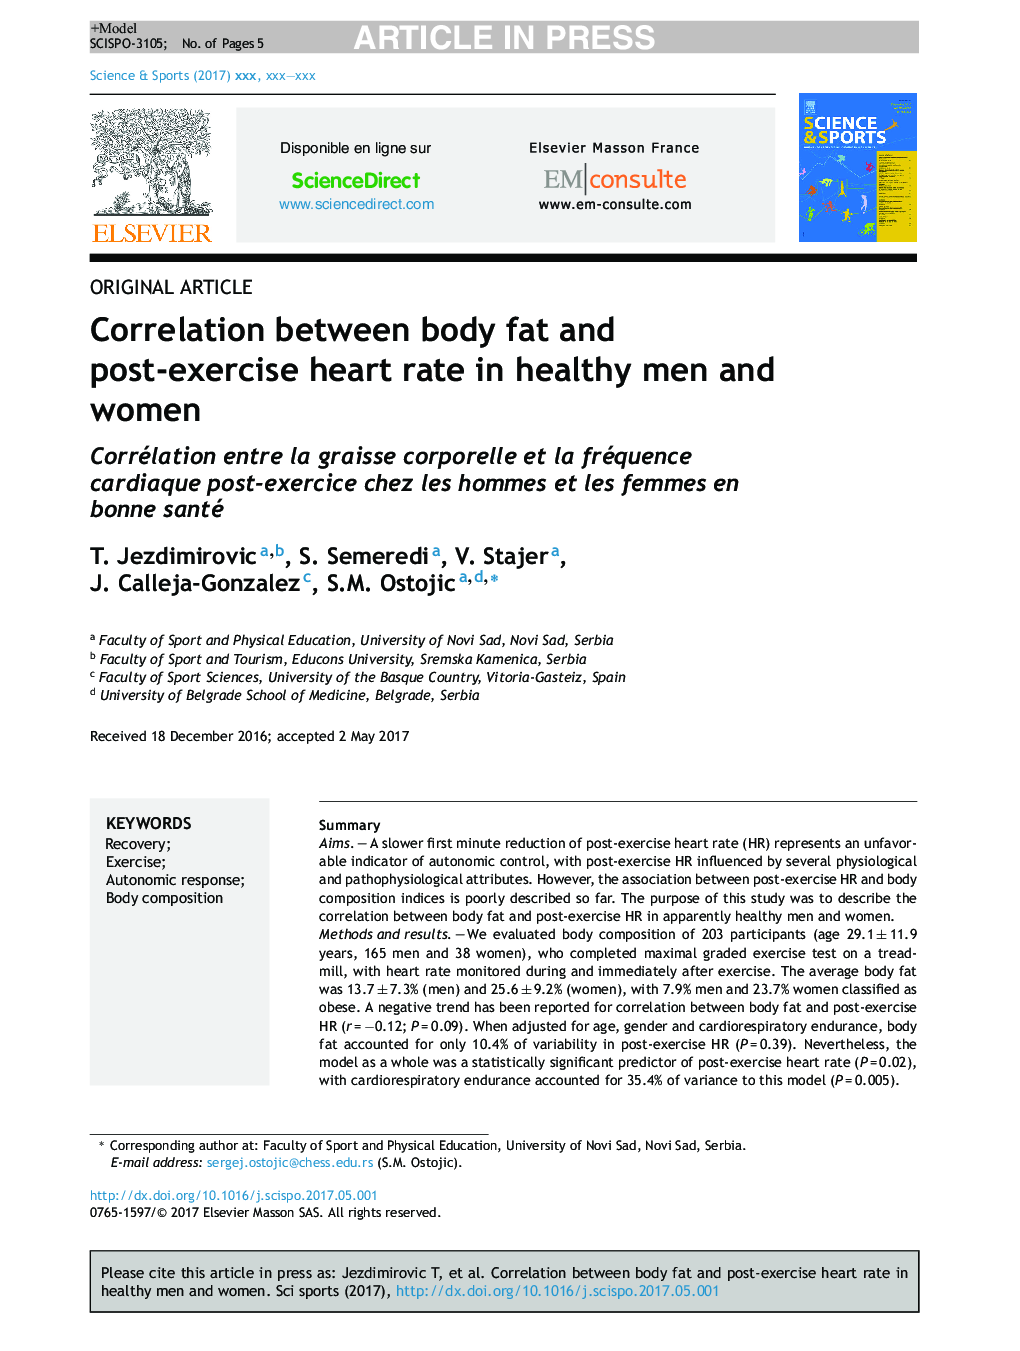 Correlation between body fat and post-exercise heart rate in healthy men and women